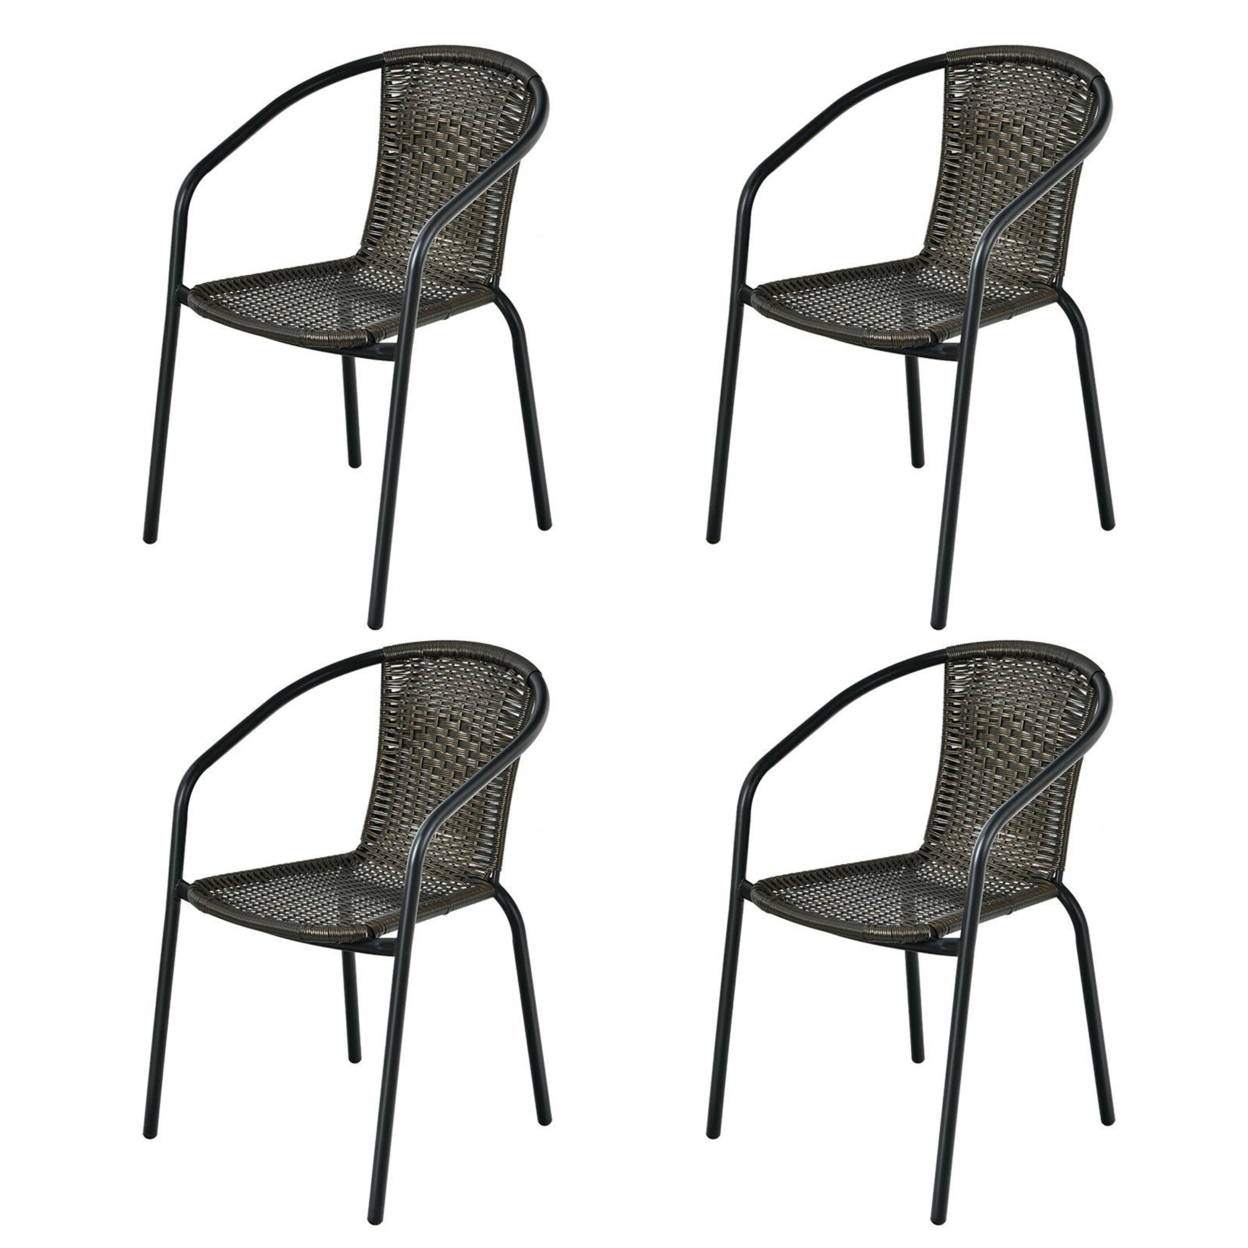 Gymax Patio Rattan Dining Chair Outdoor Stackable Armchair Yard Garden - Brown, 8 Pcs